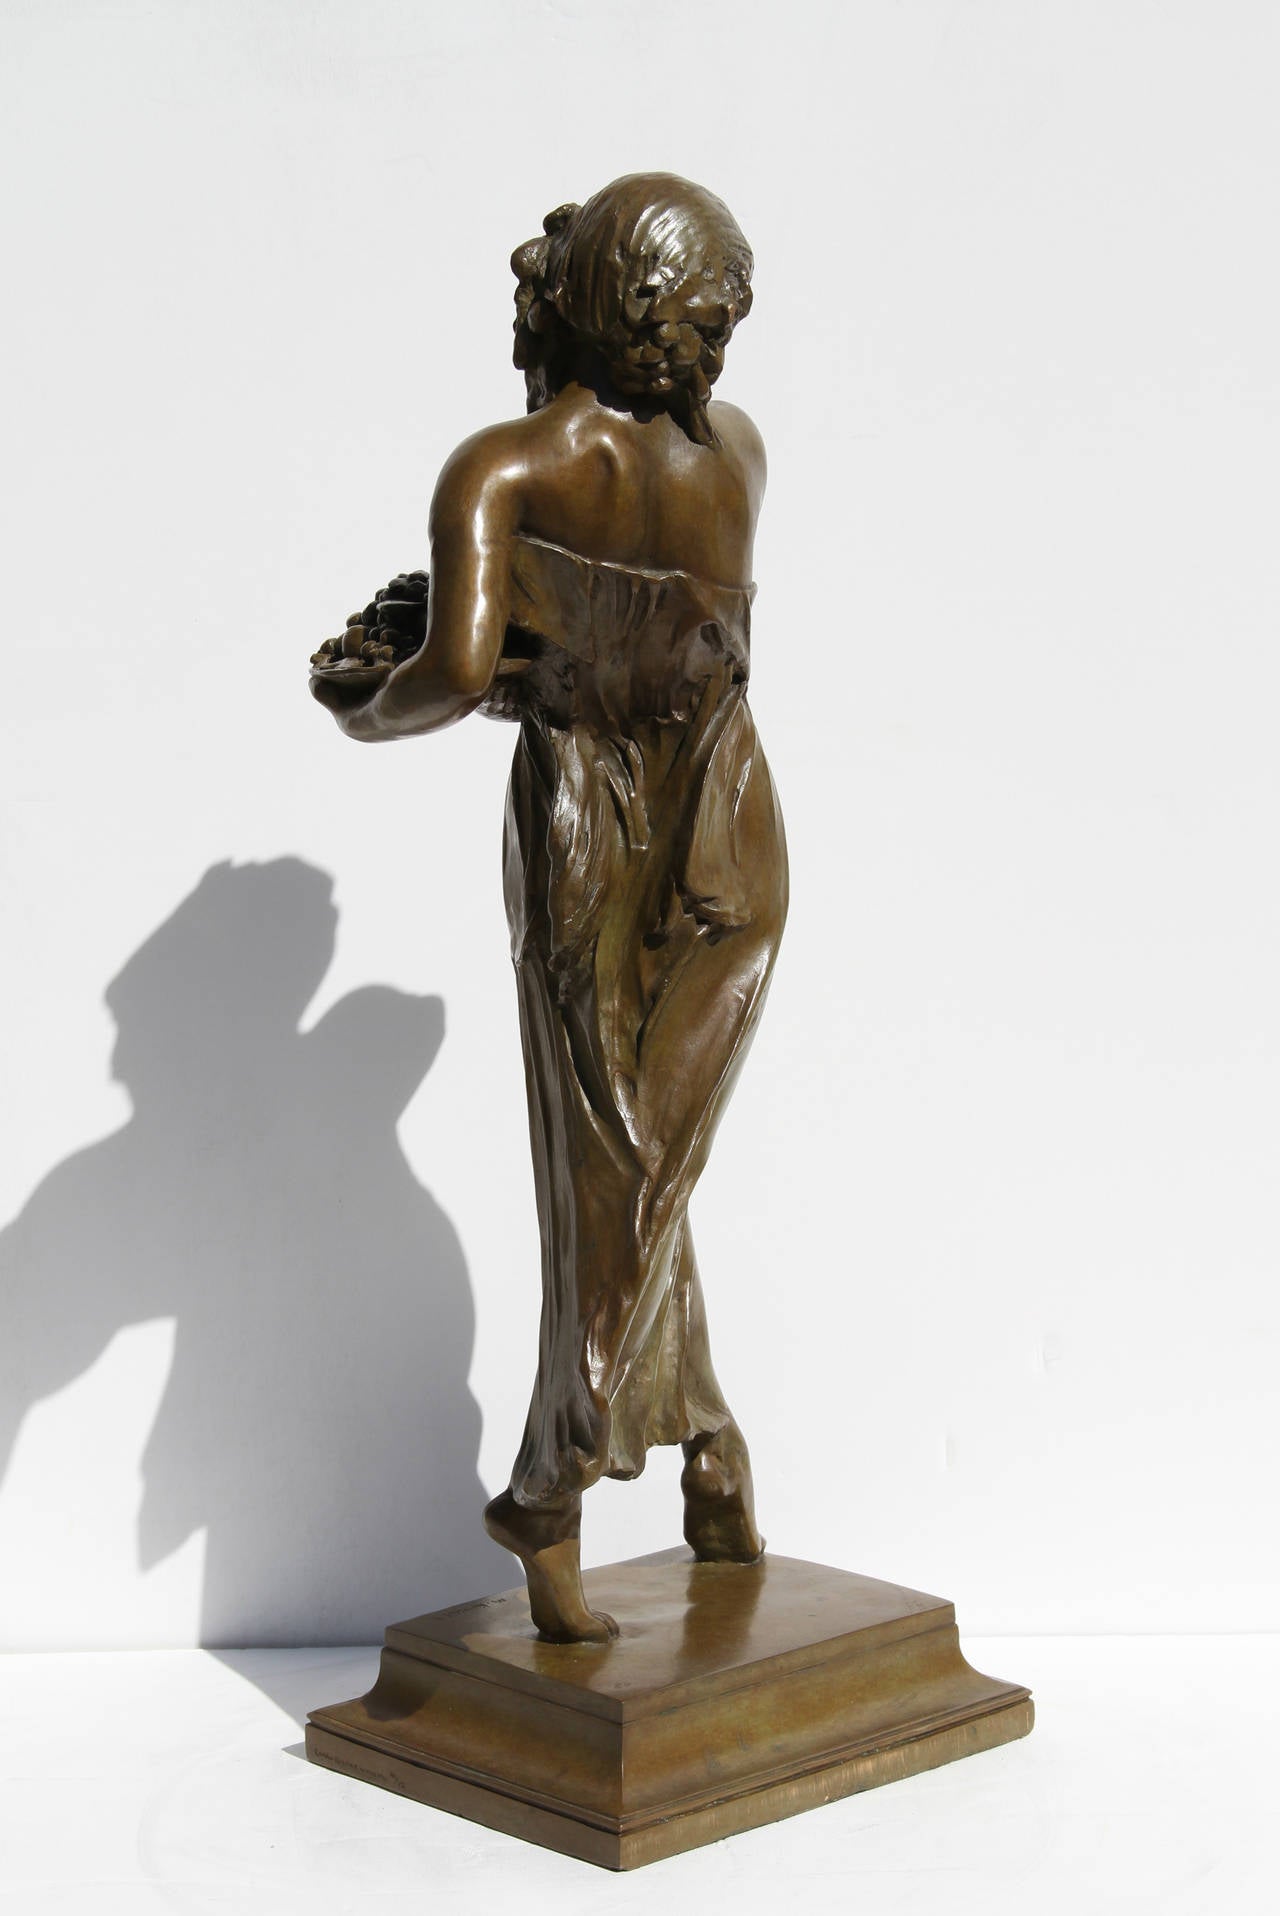 This bronze sculpture by Mario Joseph Korbel is a stunning portrayal of a woman in the Romanticist style.  Korbel began studying sculpture in his homeland of Czech Republic, and continued his studies after moving to the United States at age 18. He